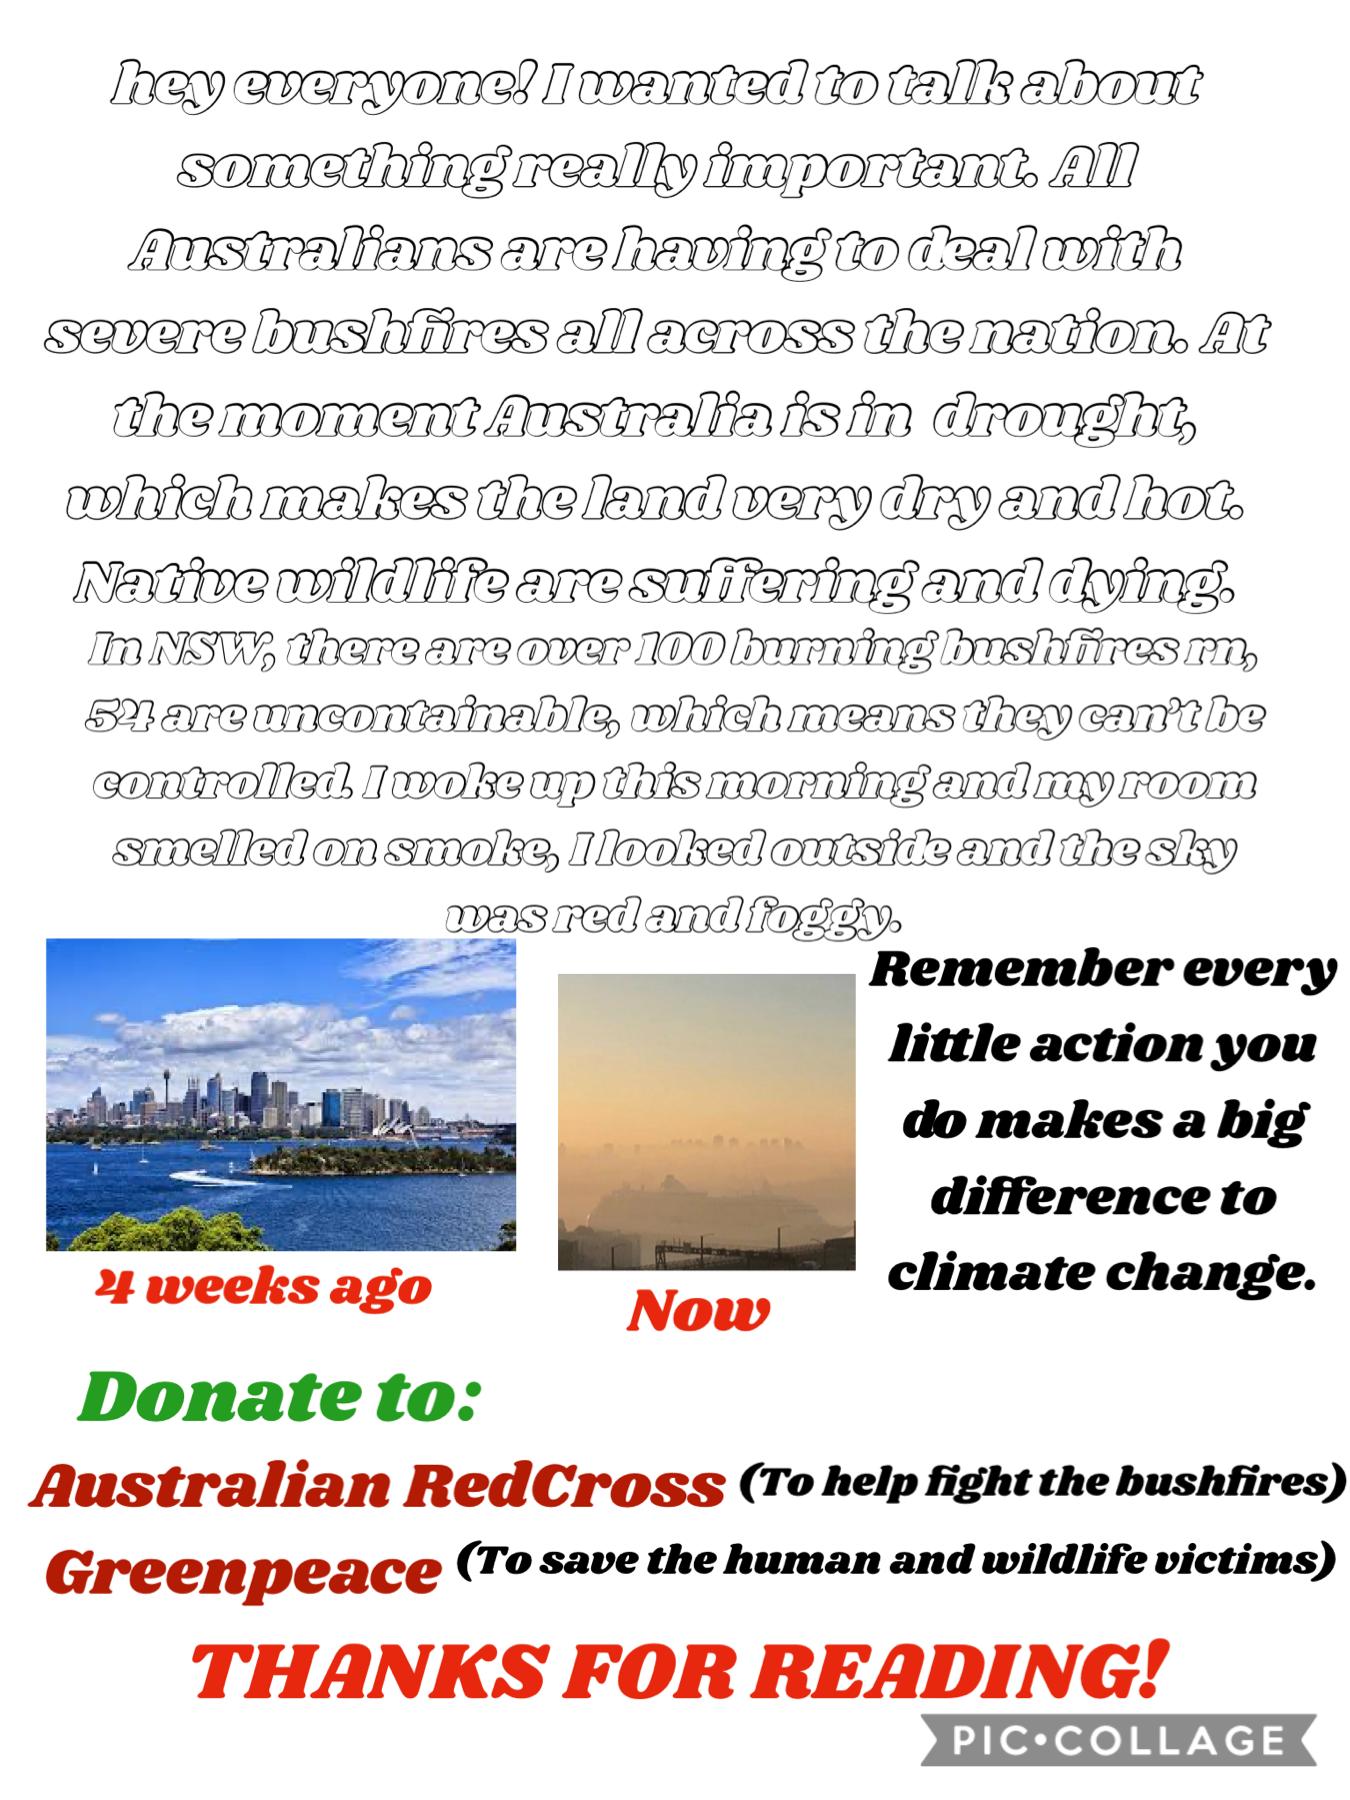 We should all start caring about climate change. It’s made a huge impact on Australia. Thanks so much for reading tho! Donate to: Australian RedCross and Greenpeace 💚💚❤️❤️